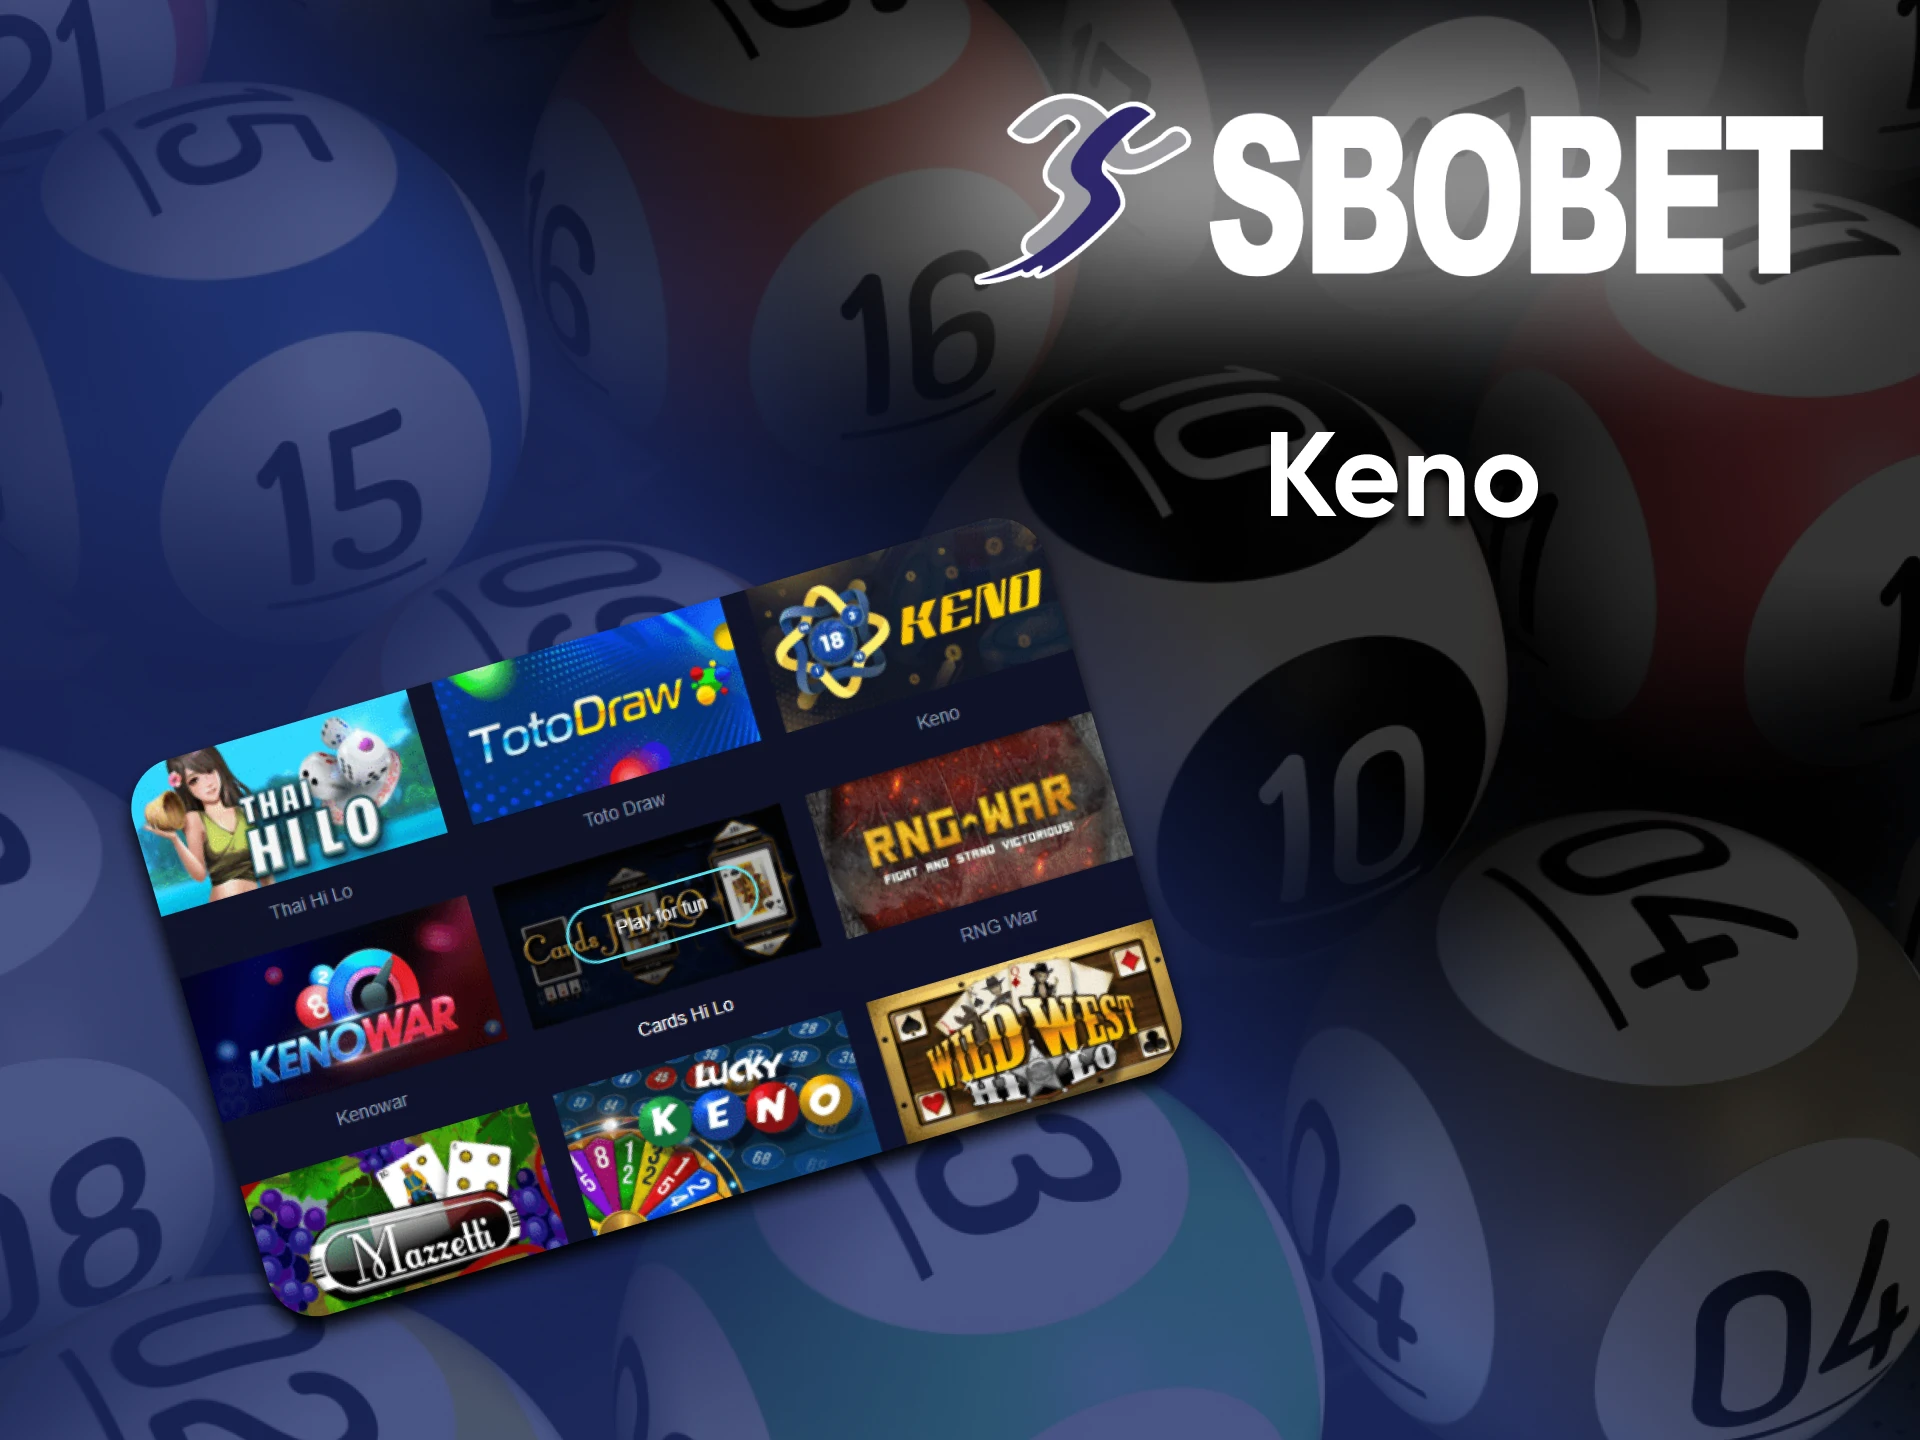 On the Sbobet site, you can play games like Keno.